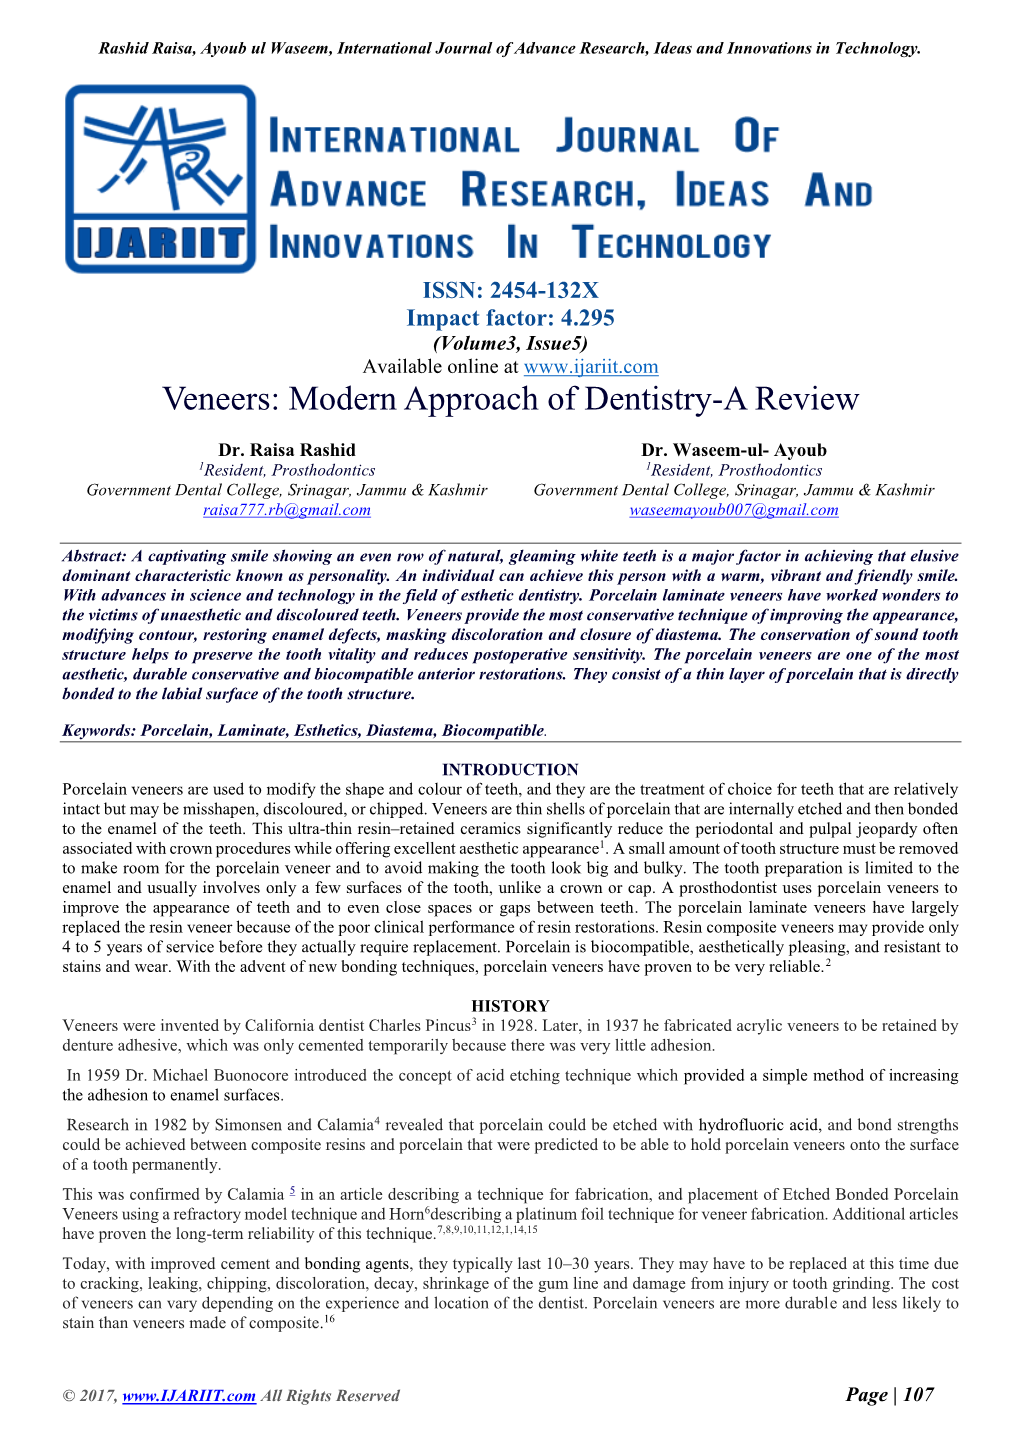 Veneers: Modern Approach of Dentistry-A Review